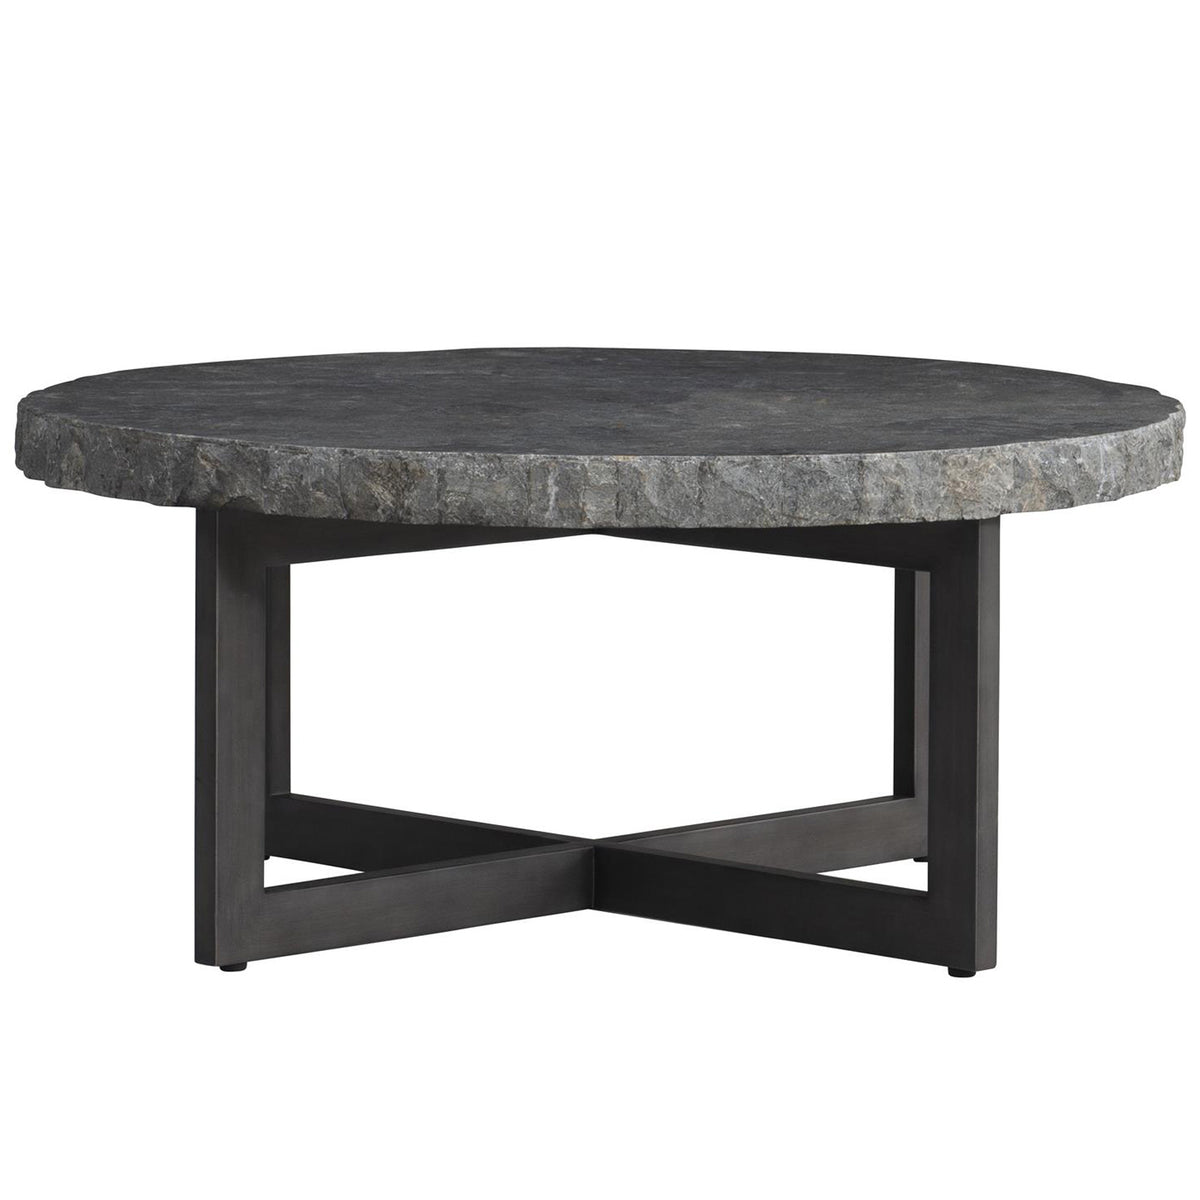 Barbados Outdoor Stone Cocktail Table